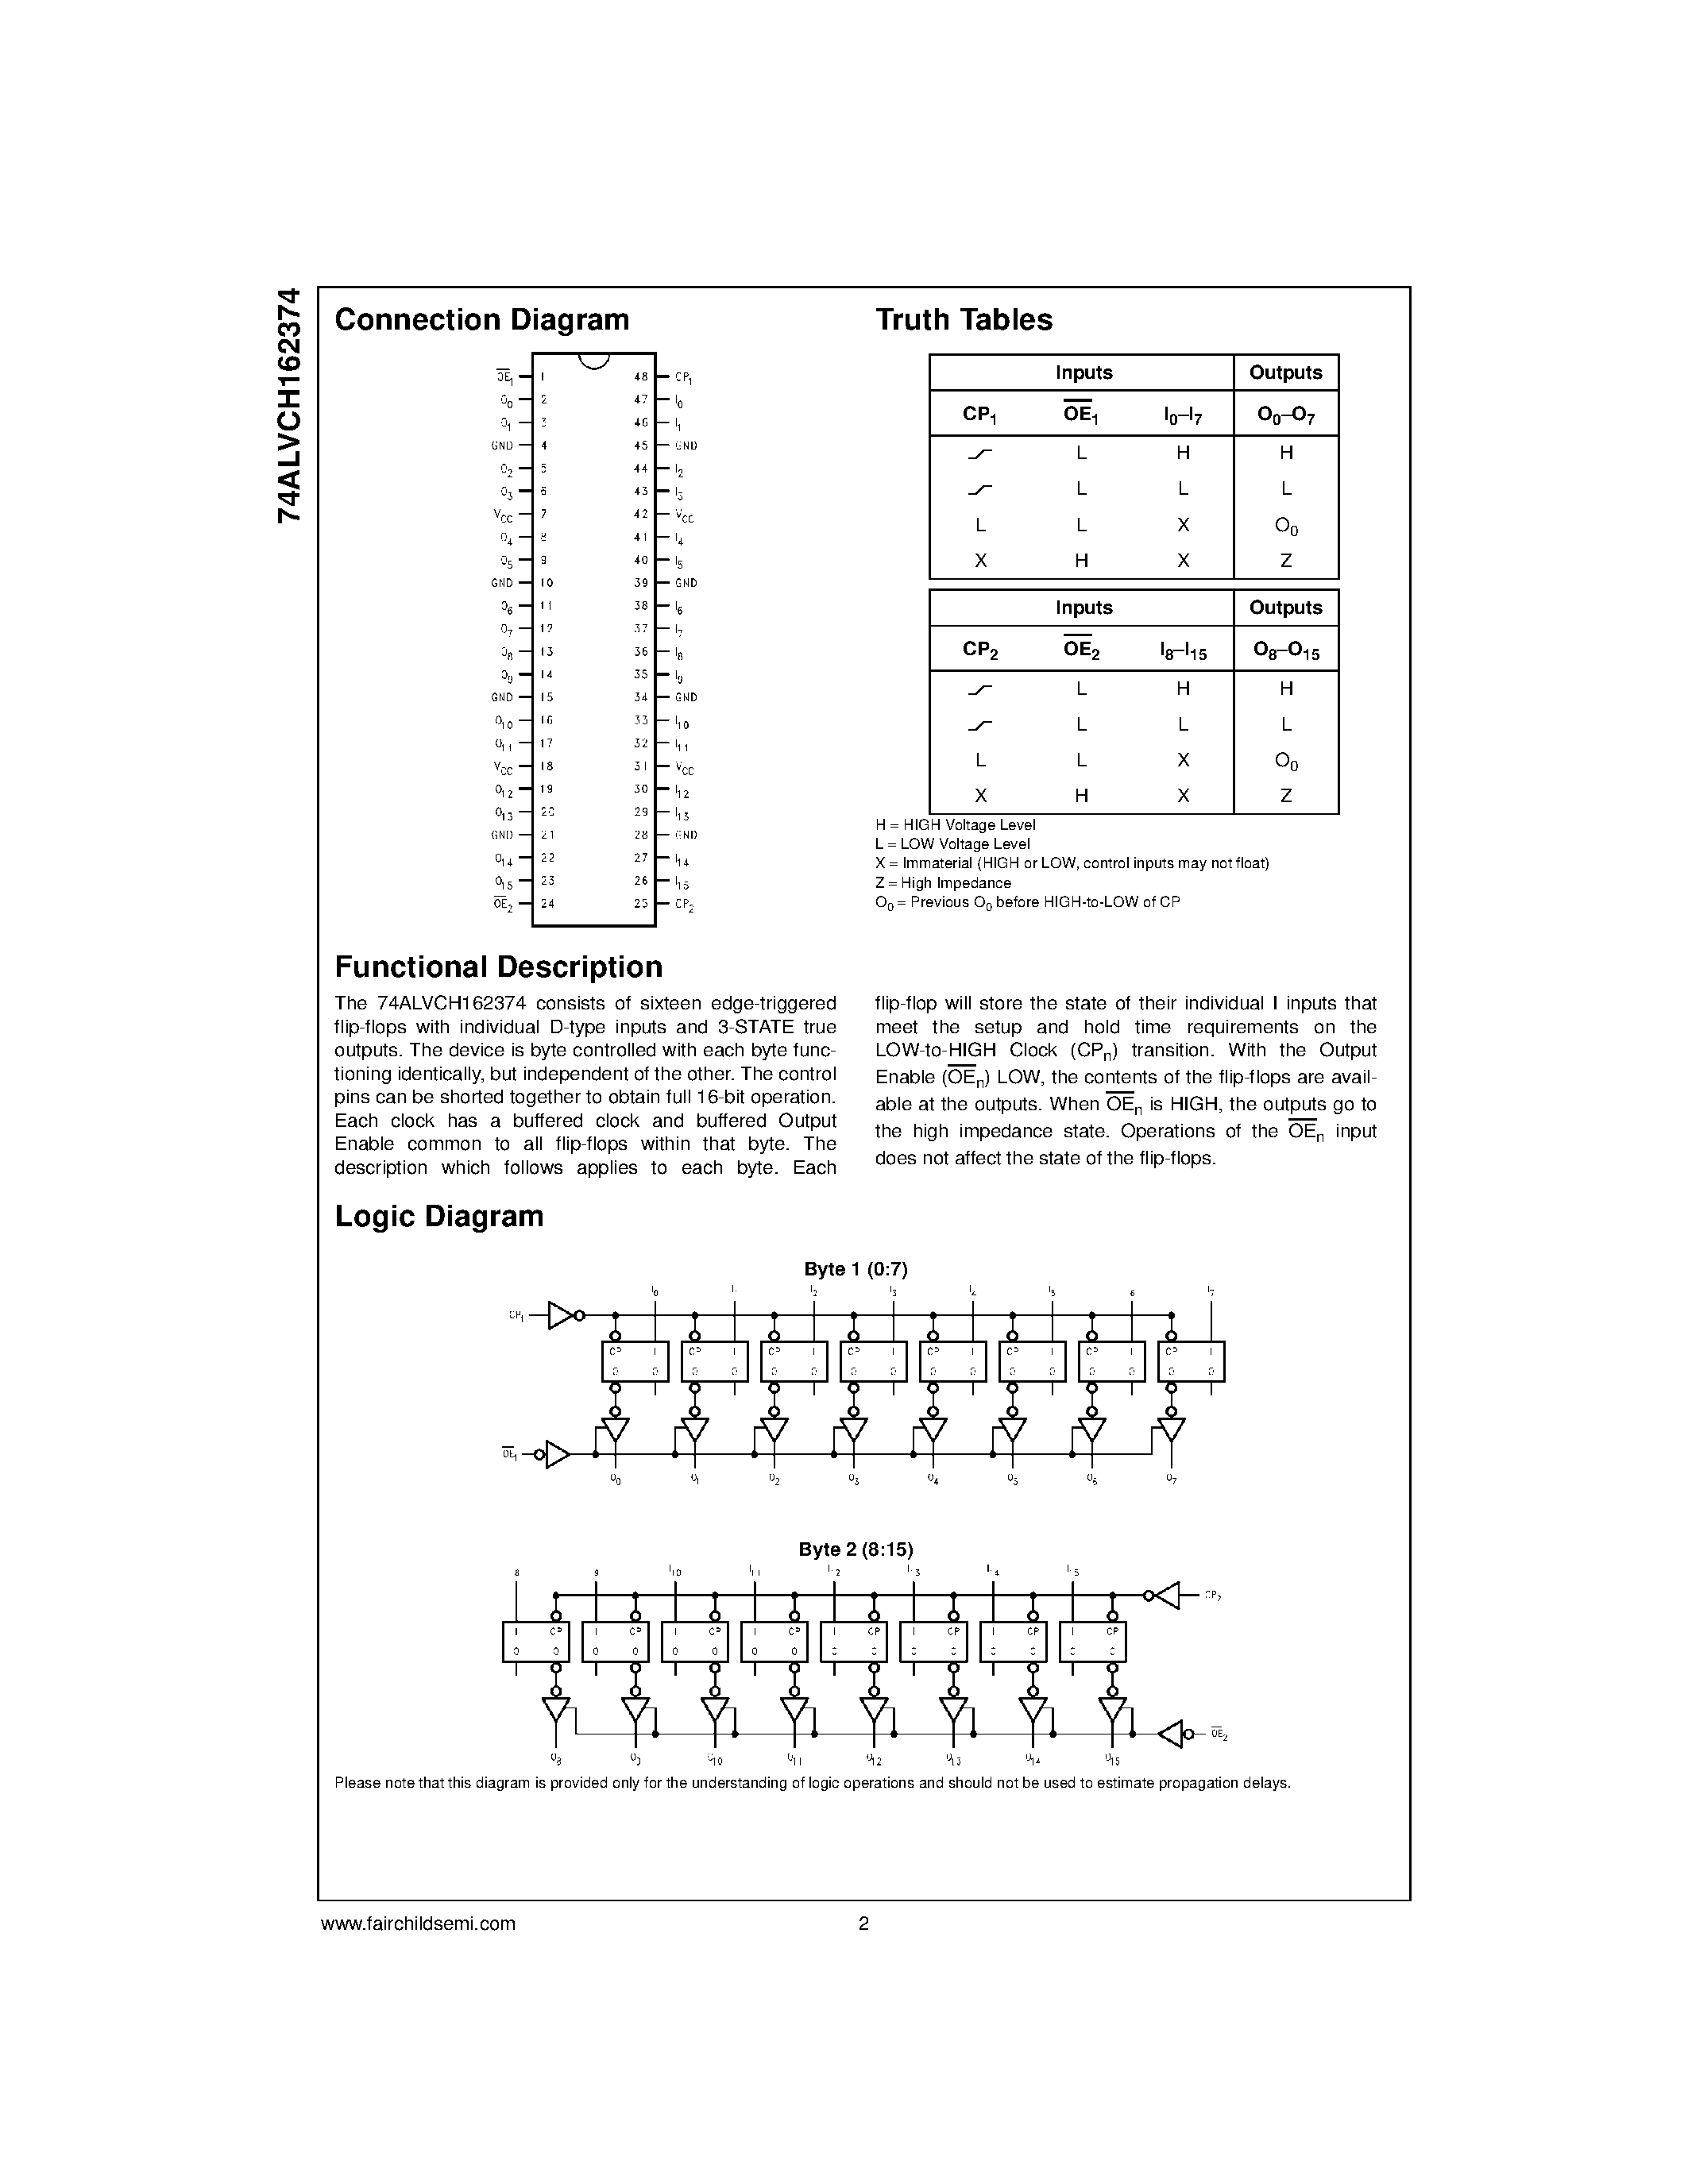 Datasheet 74ALVCH162374 - Low Voltage 16-Bit D-Type Flip-Flop with Bushold and 26 Series Resistors in Outputs page 2